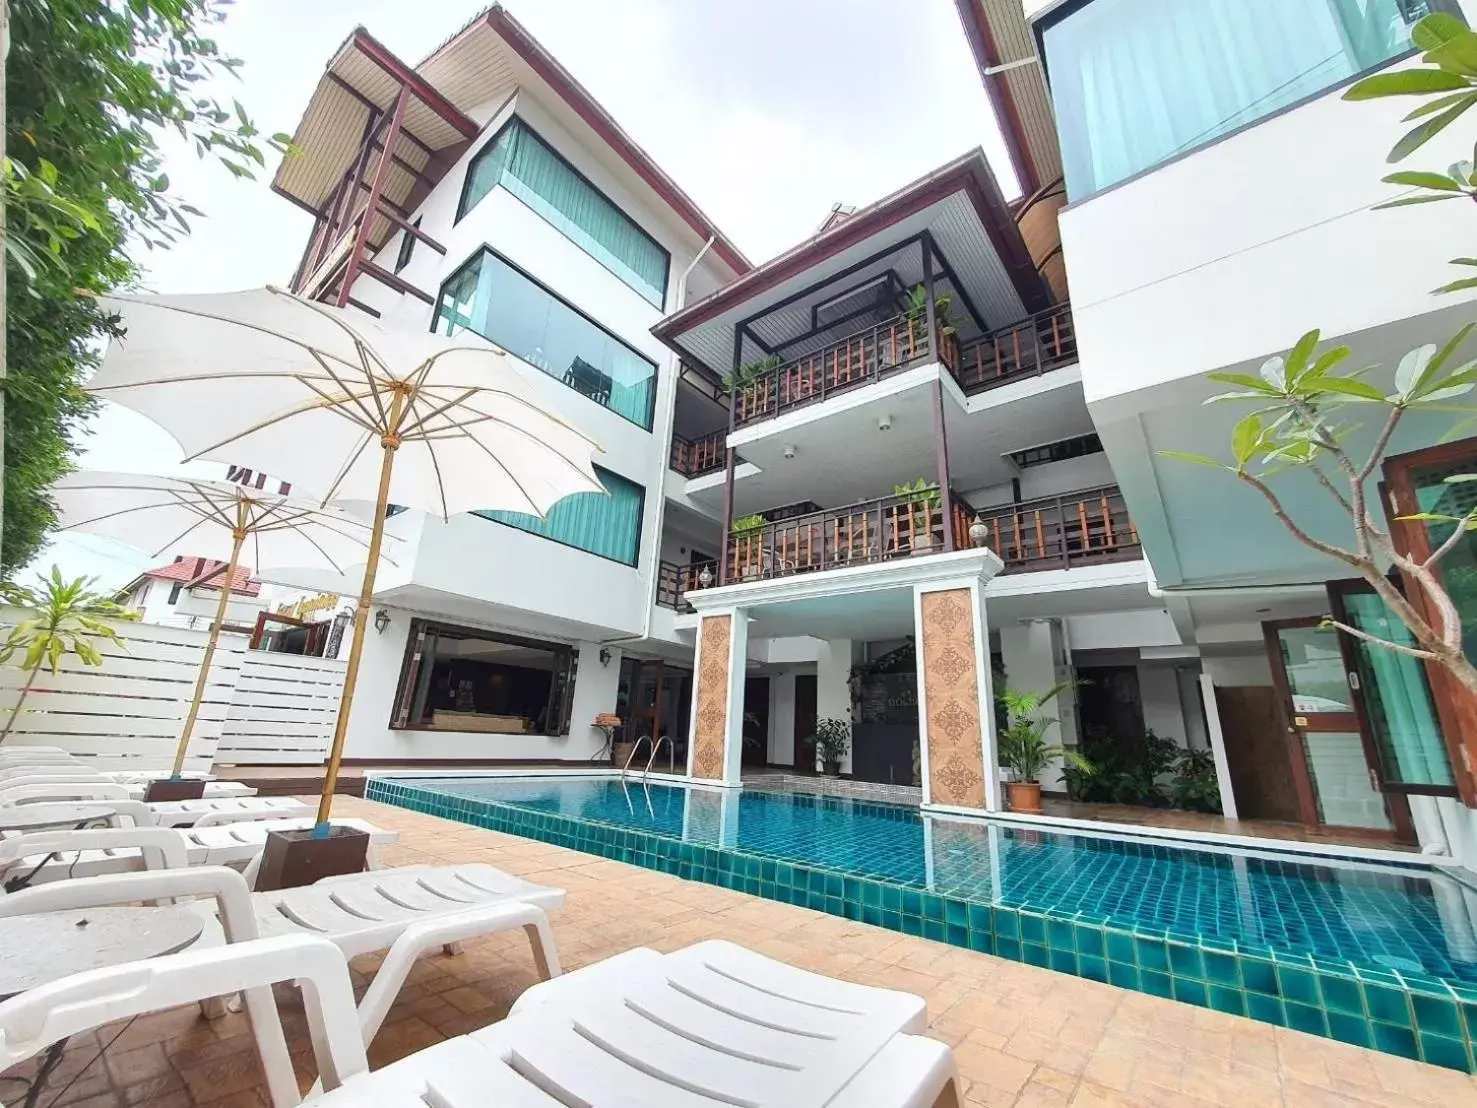 Property Building in Goldenbell Hotel Chiangmai